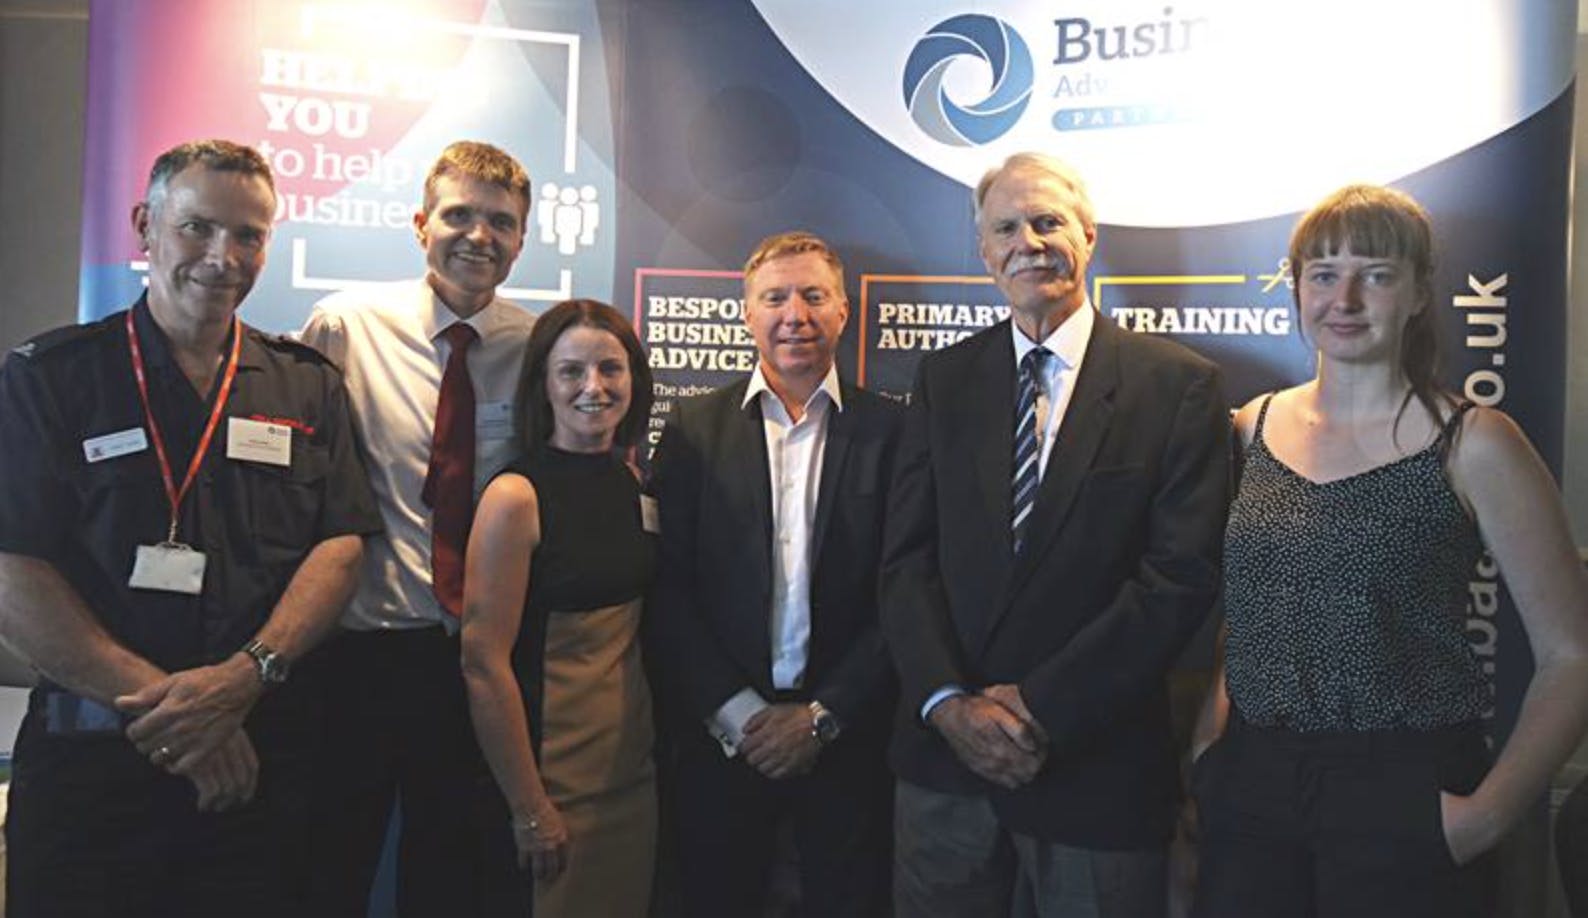 SLM Group Attends Primary Authority Launch Event in Eastbourne